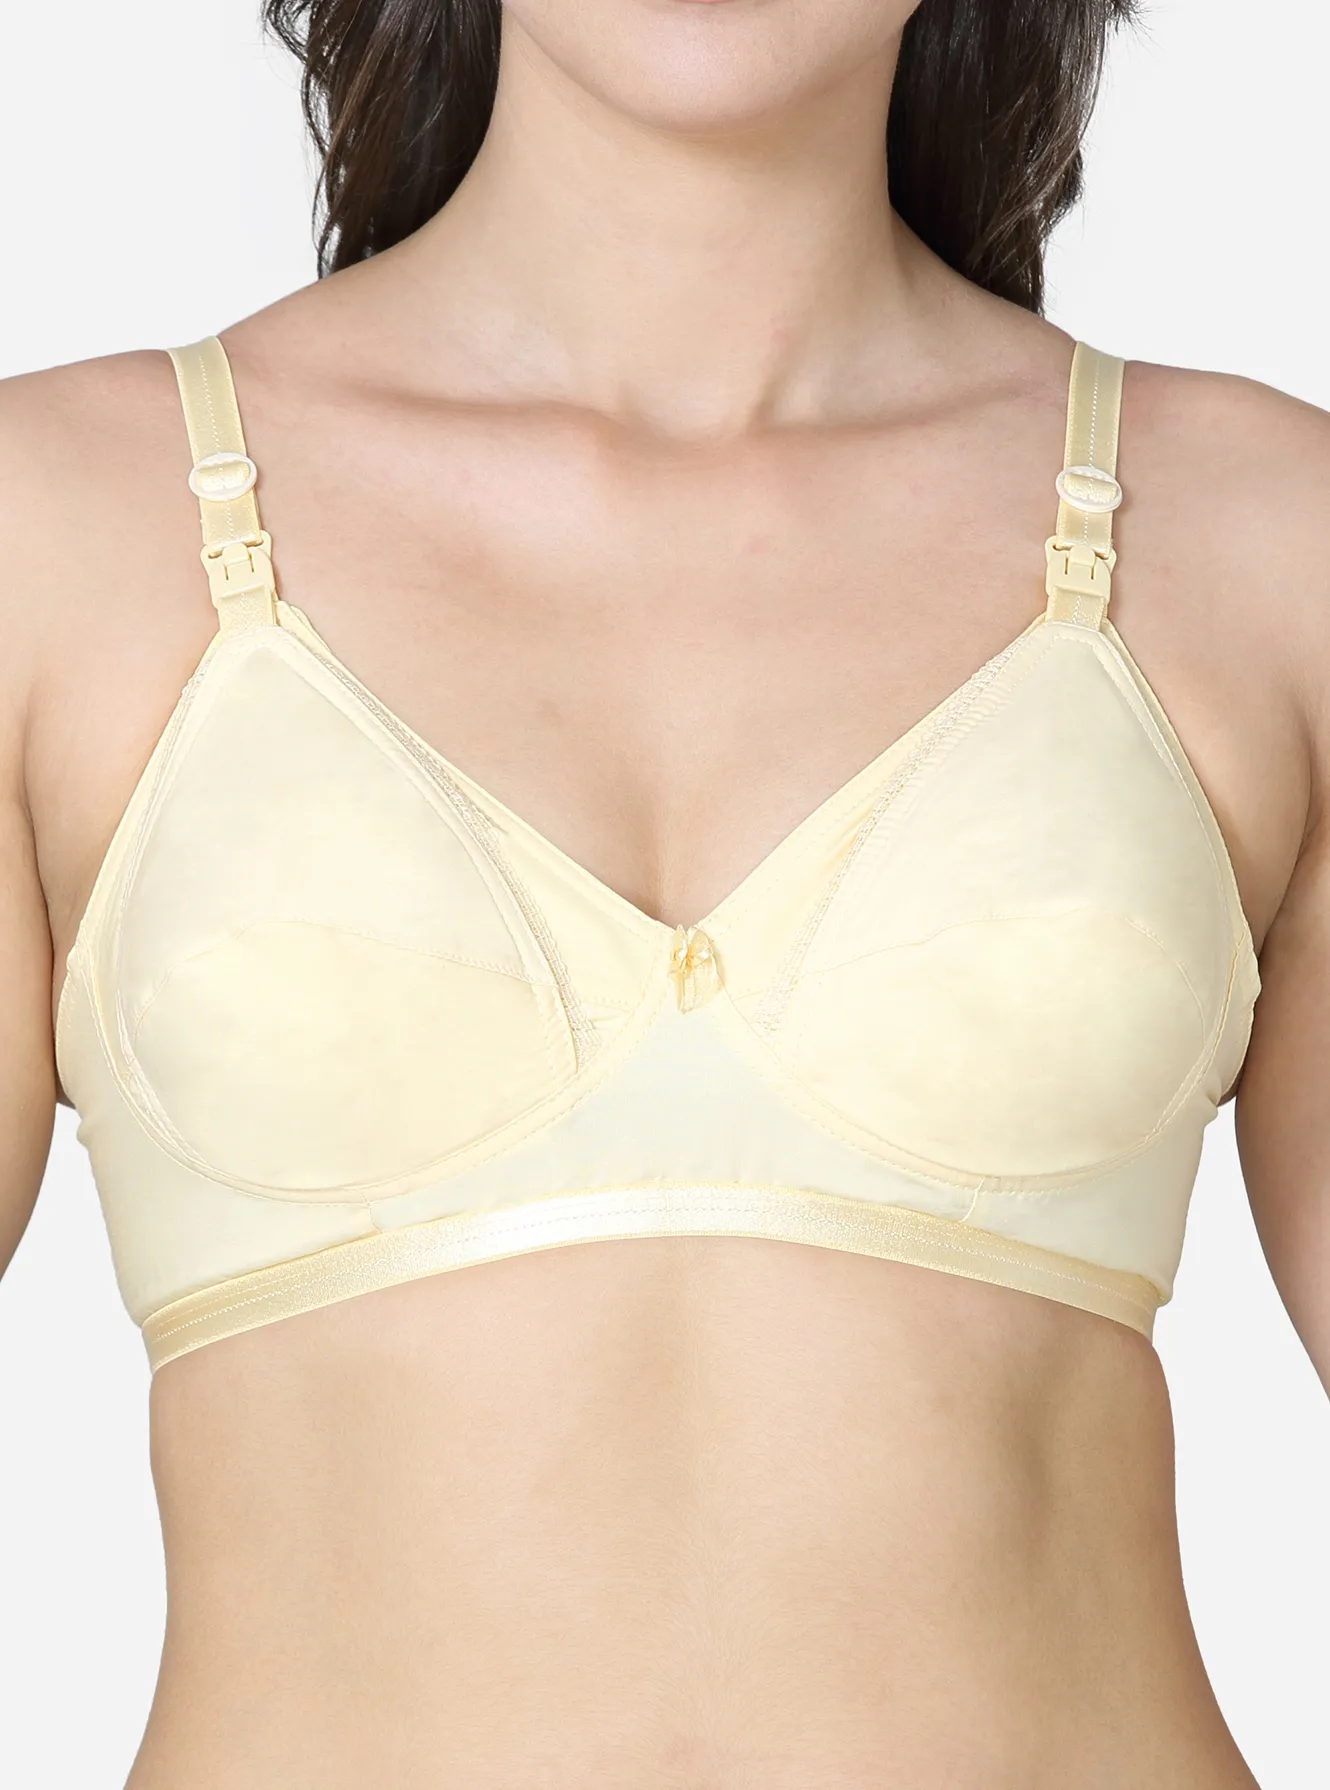 Maternity bra with detachable front flap